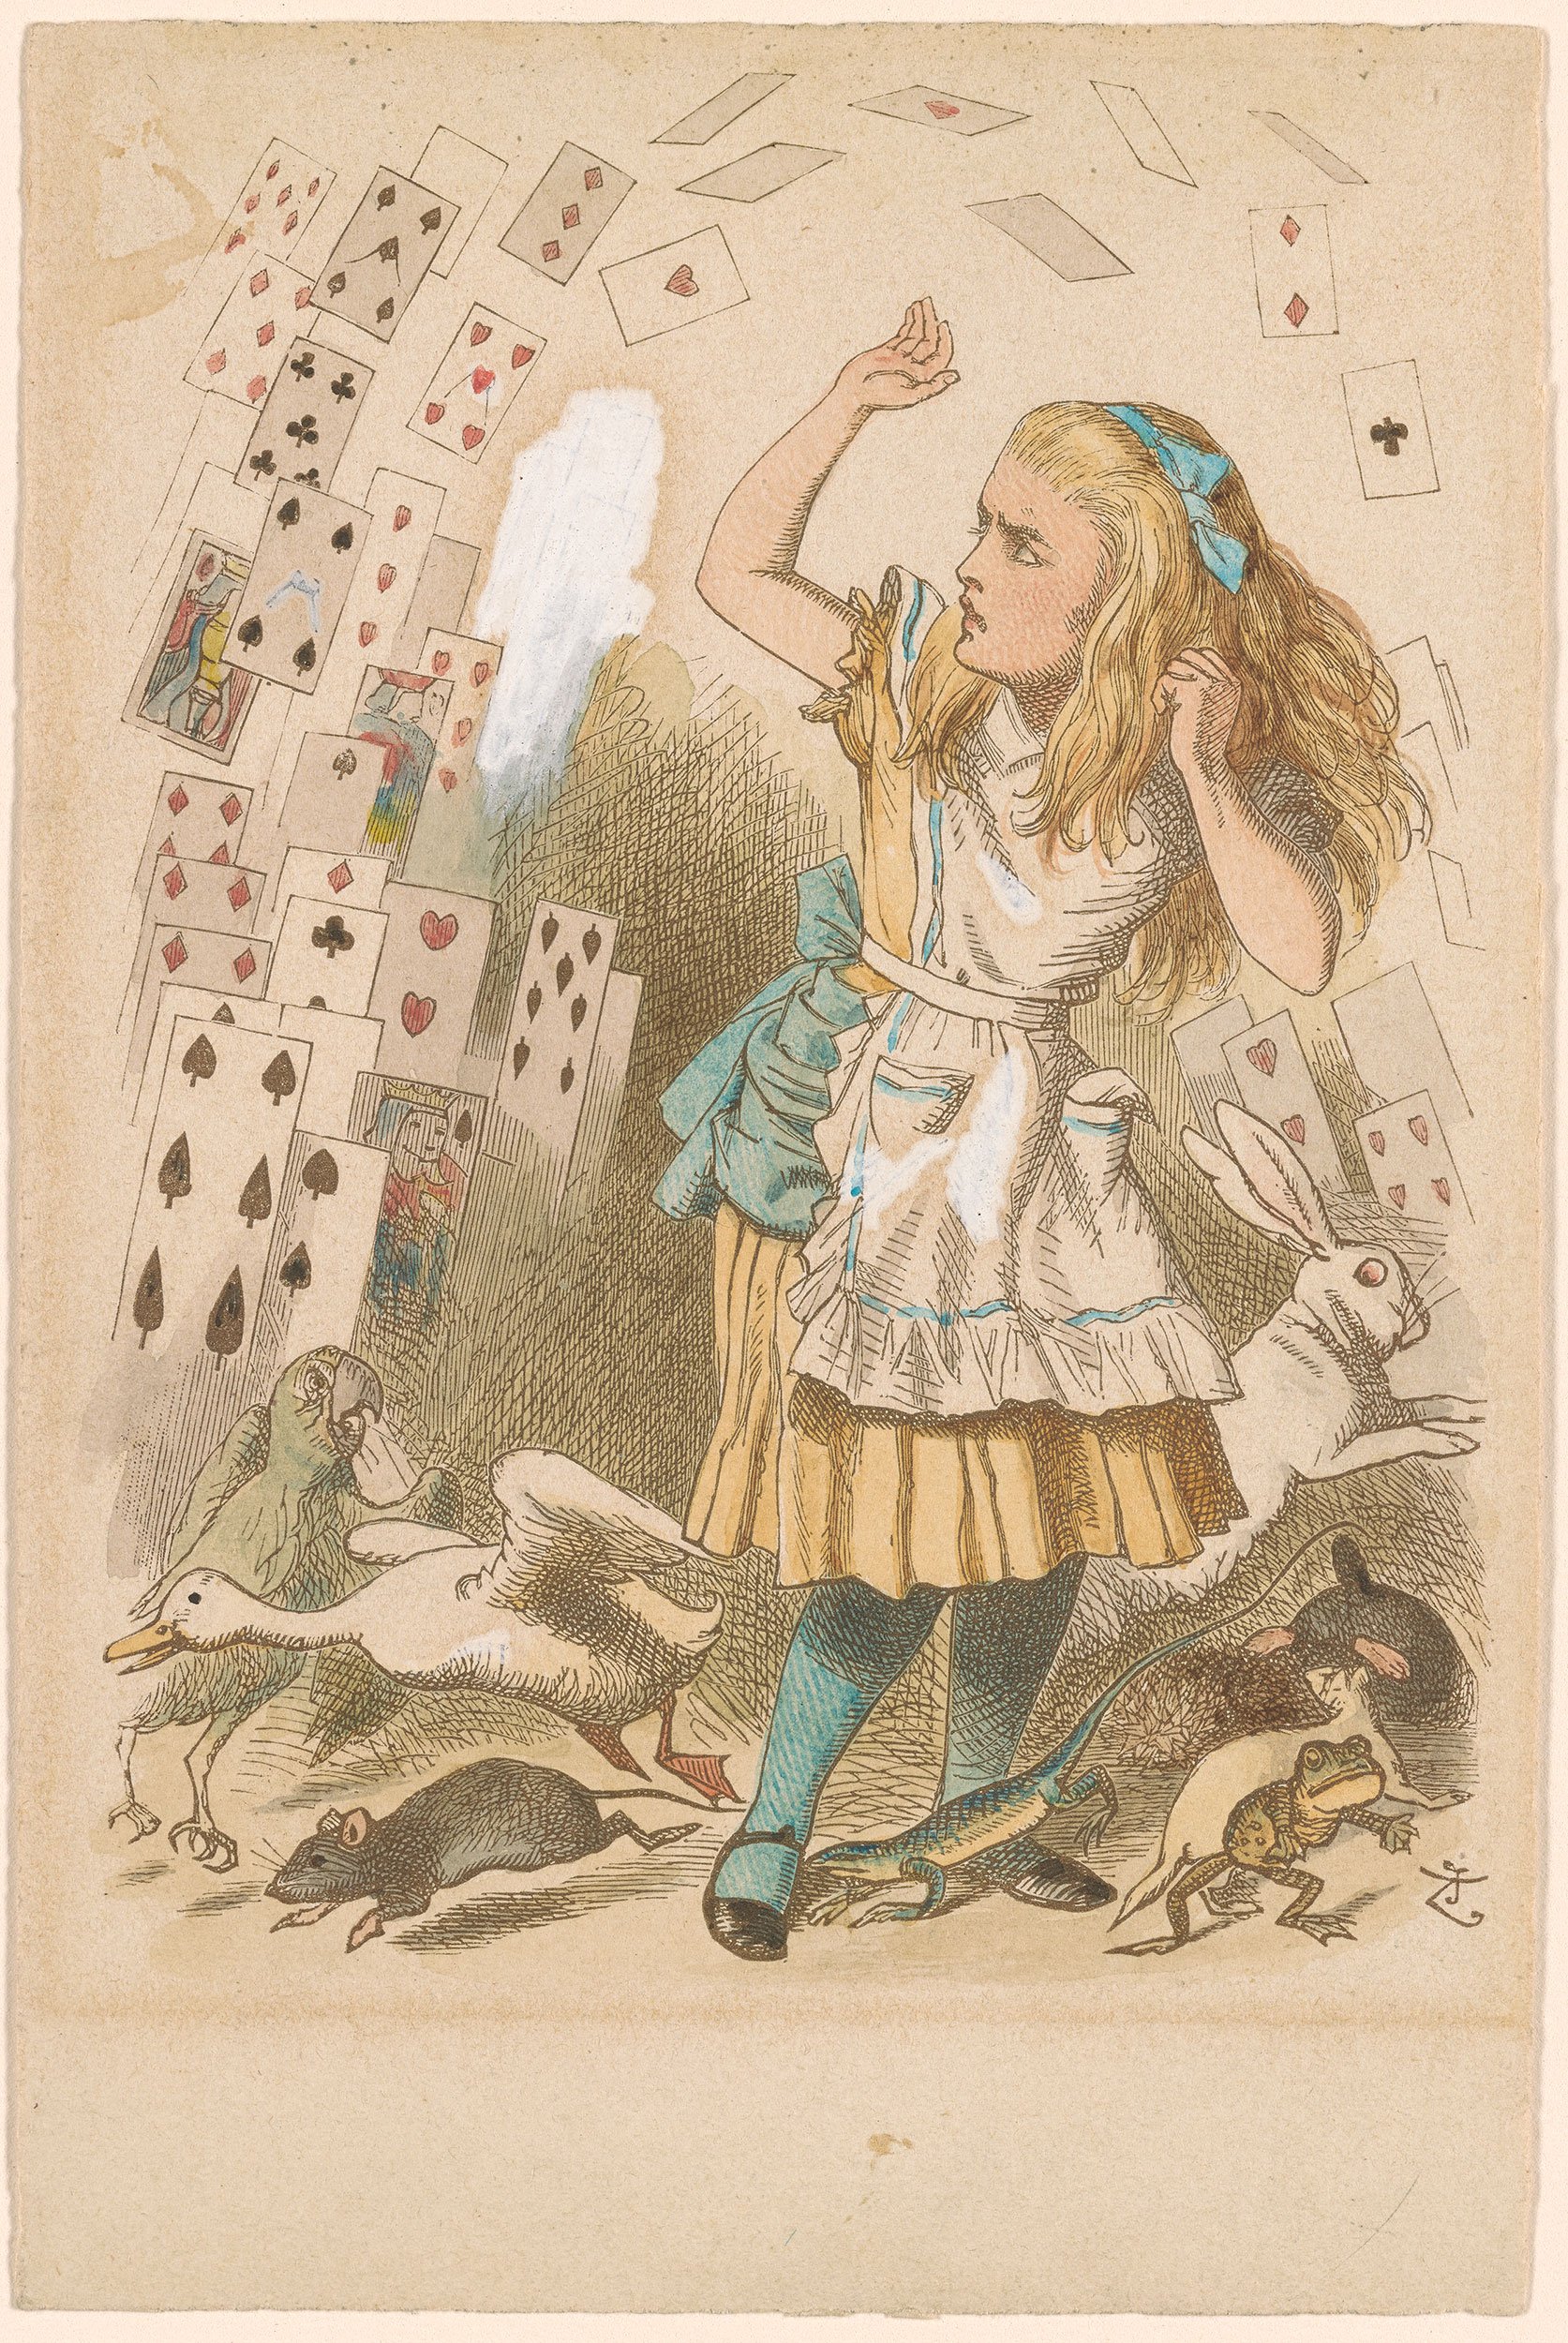 An illustration of Alice, being attacked by playing cards, surrounded by scared animals trying to get away.